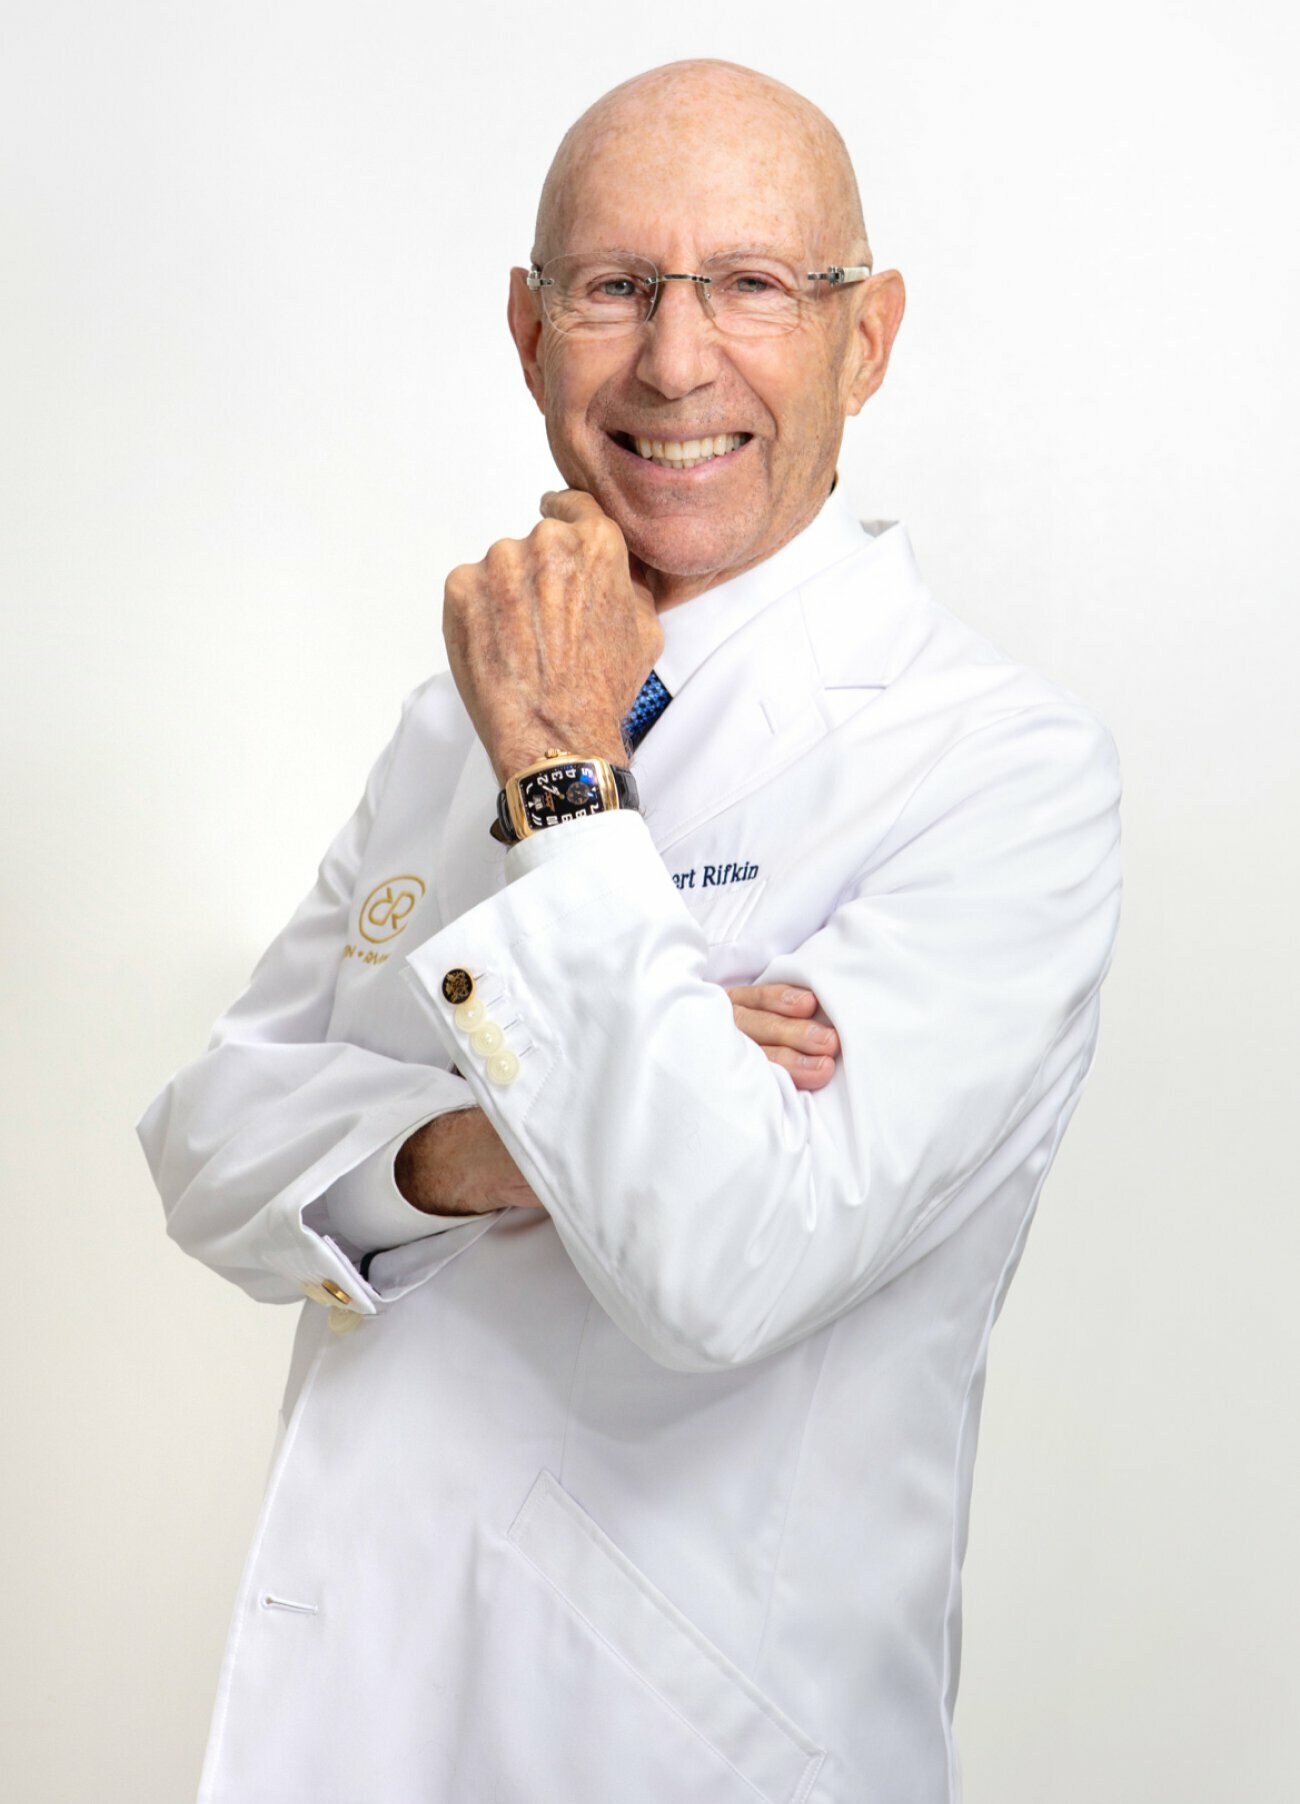 Beverly Hills Cosmetic Dentist - Dr. Rifkin